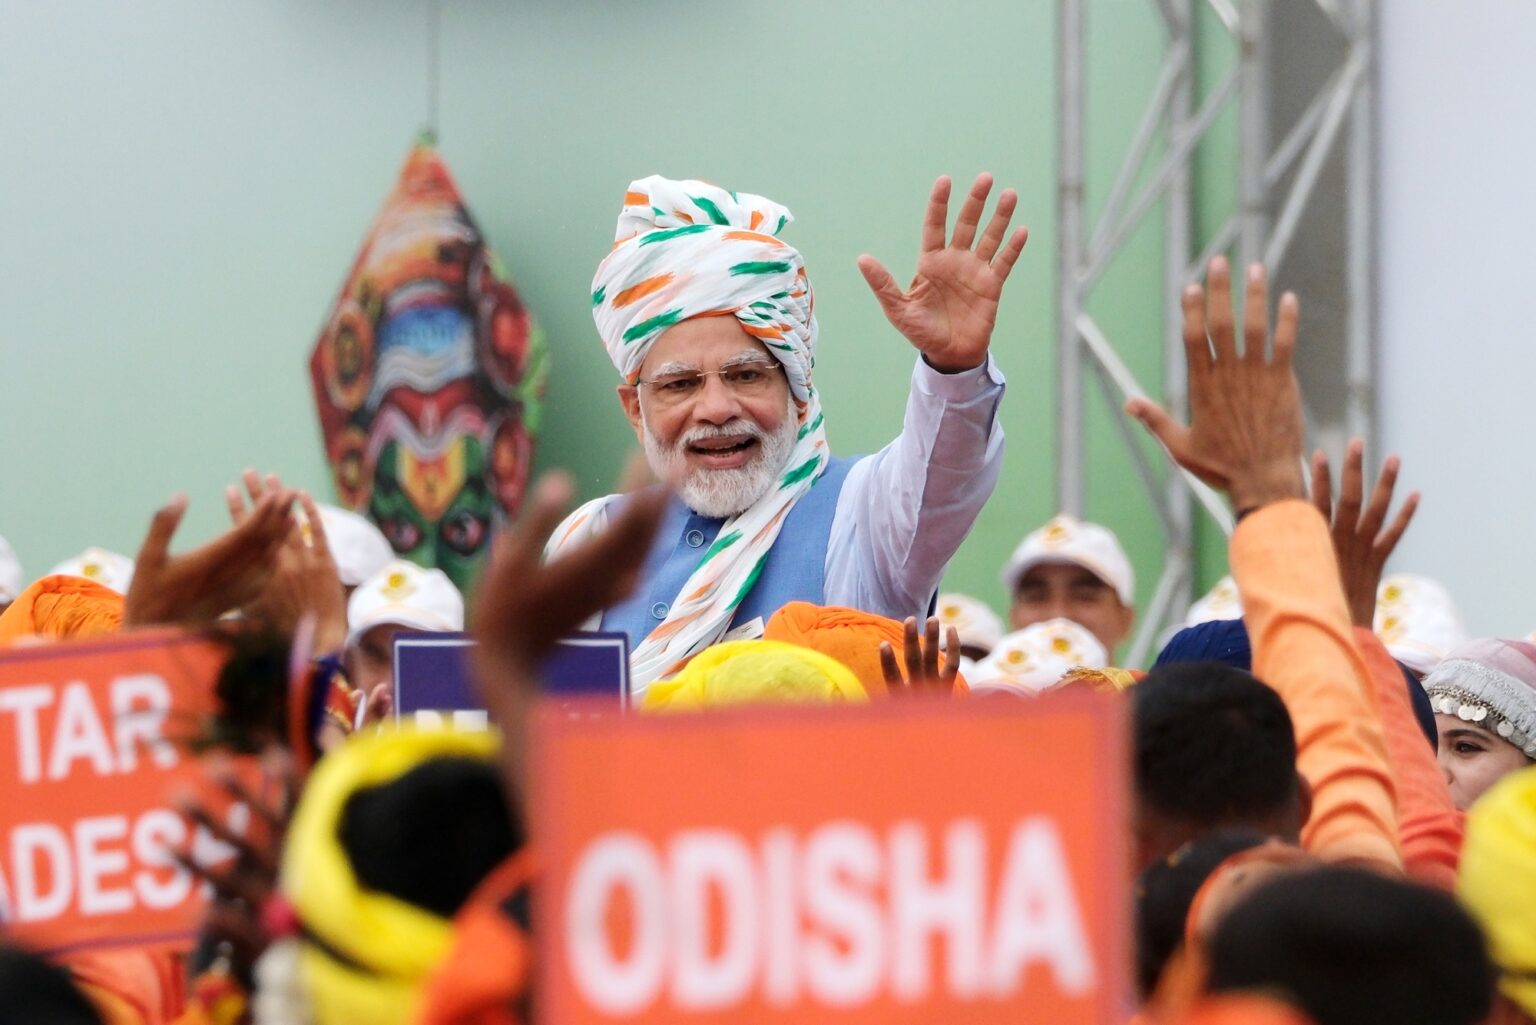 India's PM Narendra Modi celebrating India's Independence Day at a rally in 2022. He wears a white turban with a green and orange pattern and is waving to the crowd. He stands in front of a mint green wall. The crowd wave back and hold orange placards, they wear orange and yellow.